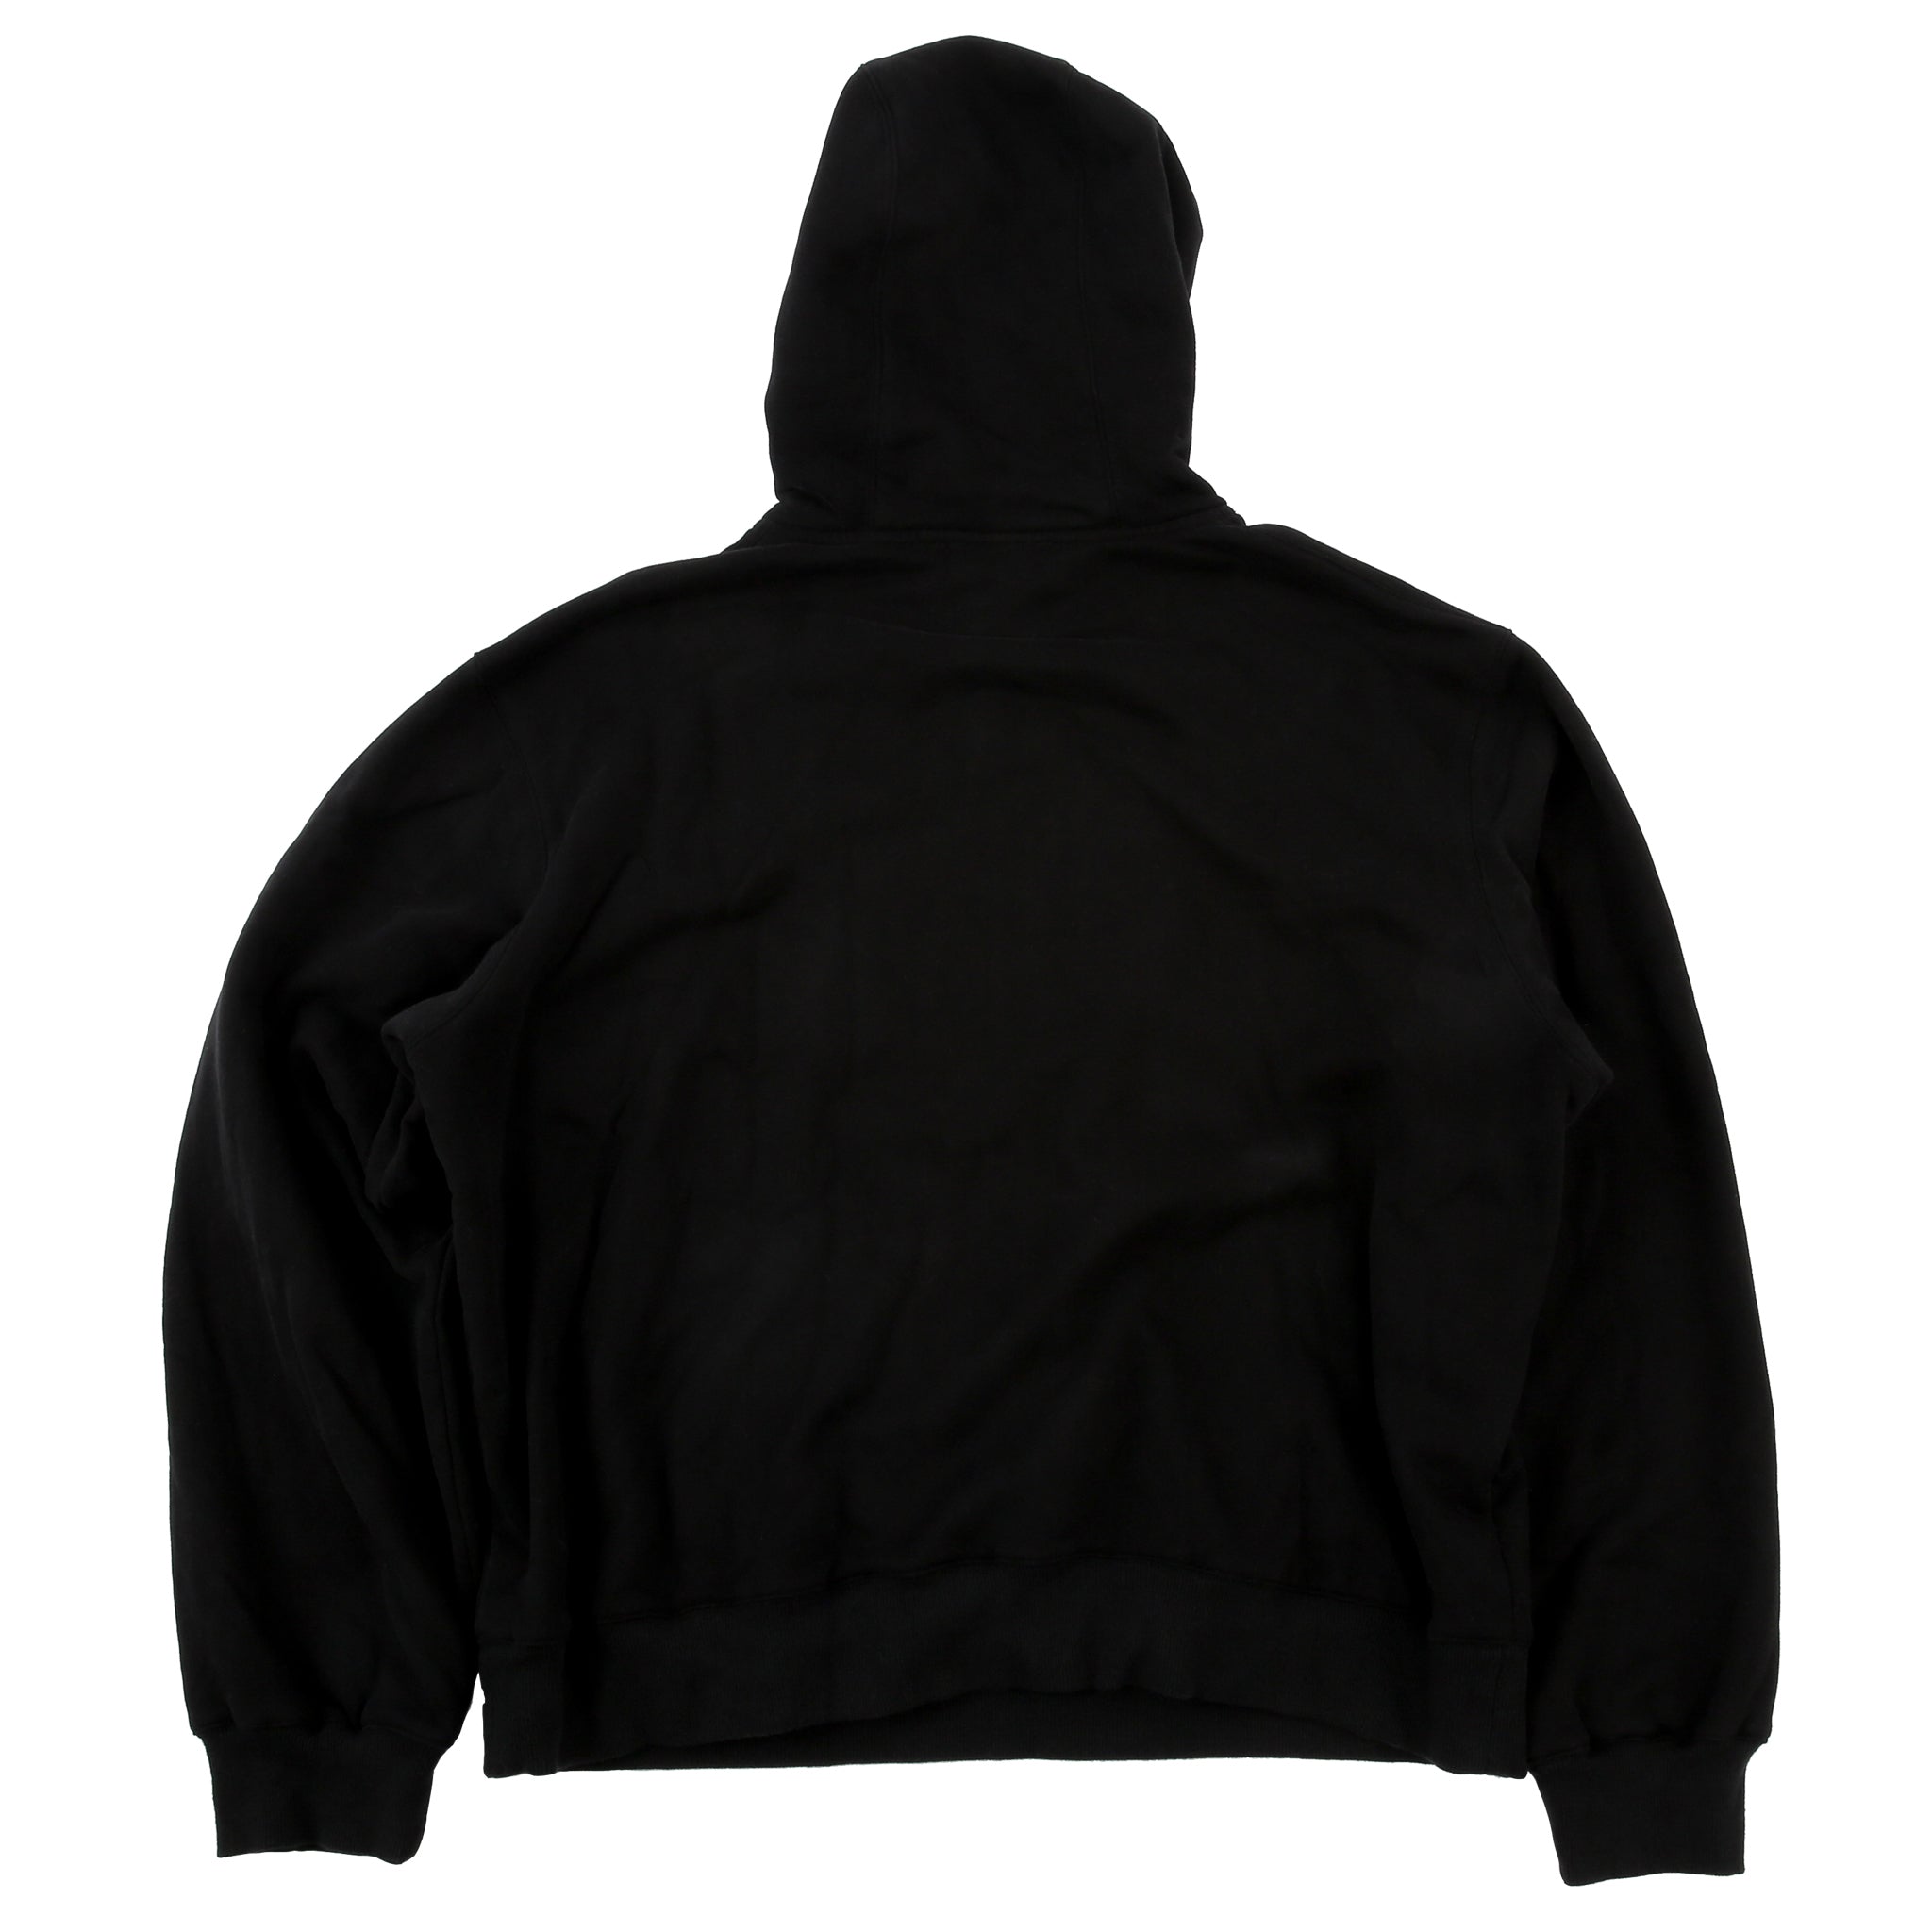 CHERRY DISCOTHEQUE - LOGO HOODIE IN ONYX BLACK WITH RED EMBROIDERY